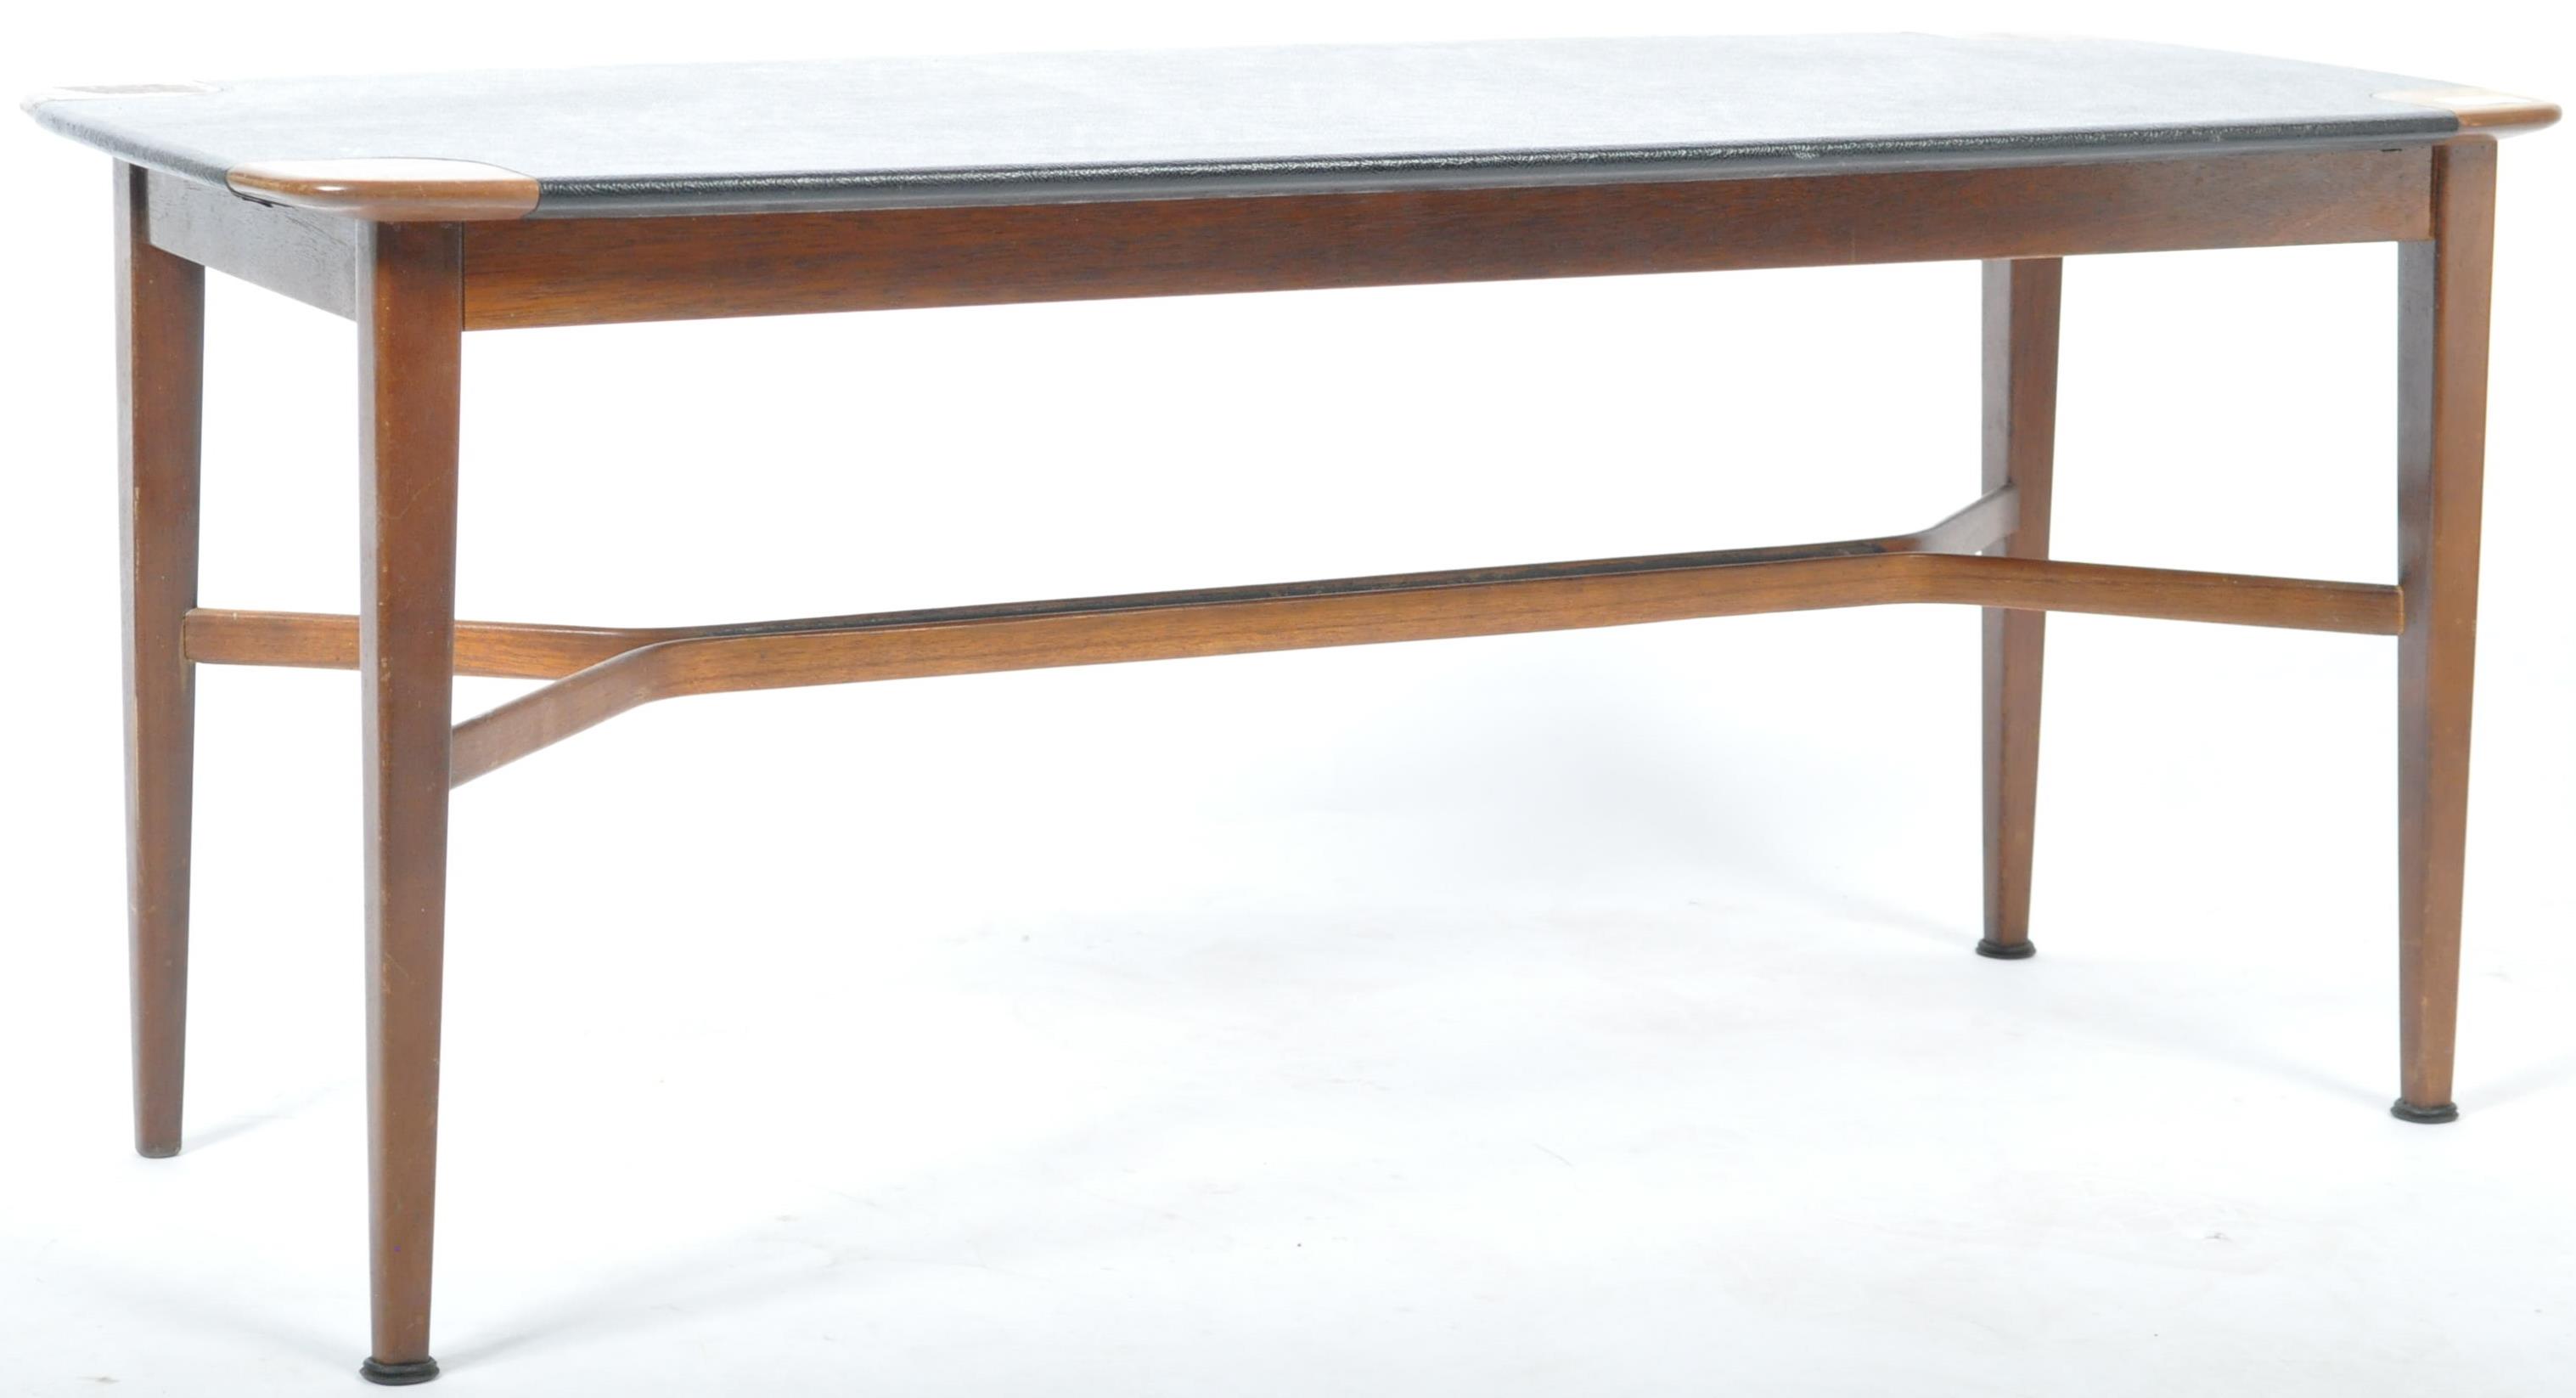 E. GOMME - G-PLAN - MID CENTURY TOLA WOOD AND VINYL COFFEE TABLE